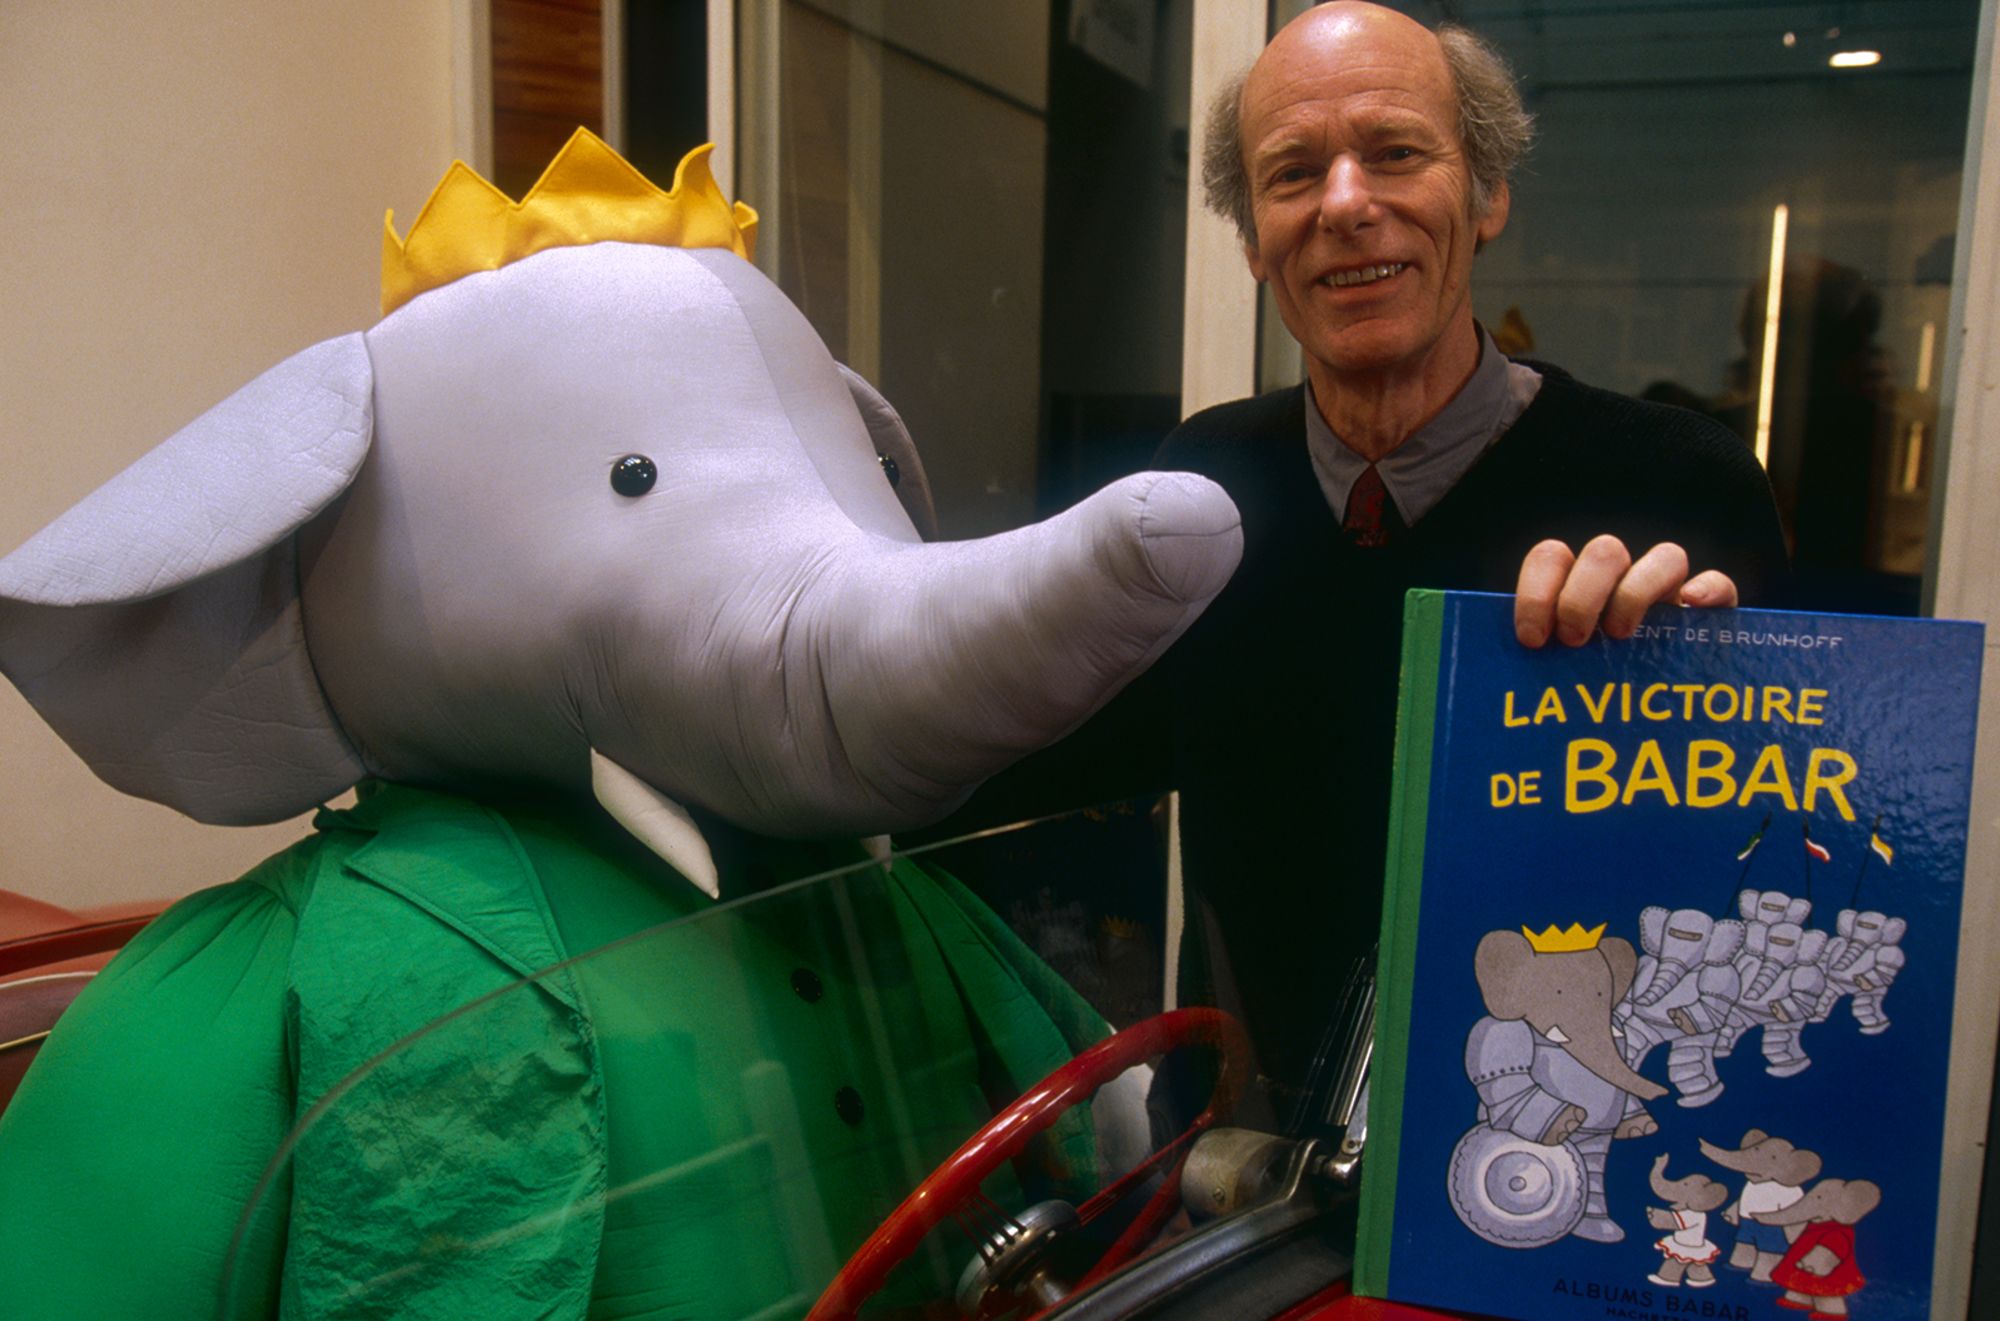 Laurent de Brunhoff presents his 1992 book "La Victoire de Babar" (sold in English as "Babar's Battle"), a publication marking the 60th anniversary of his father Jean's famous character, Babar.